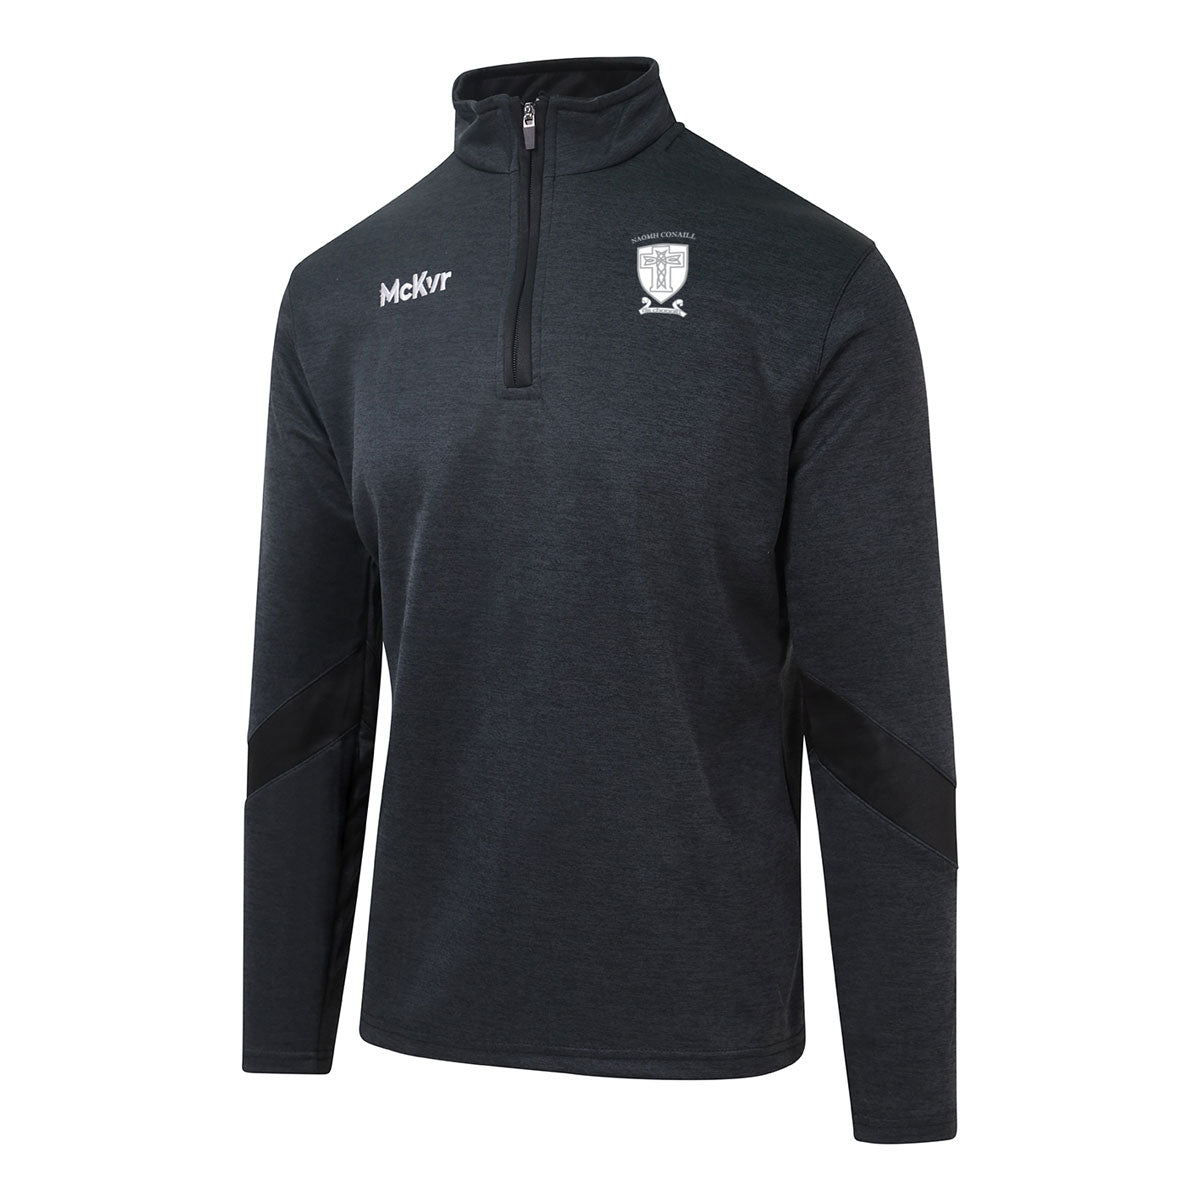 Mc Keever Naomh Conaill Donegal Core 22 1/4 Zip Top - Adult - Black